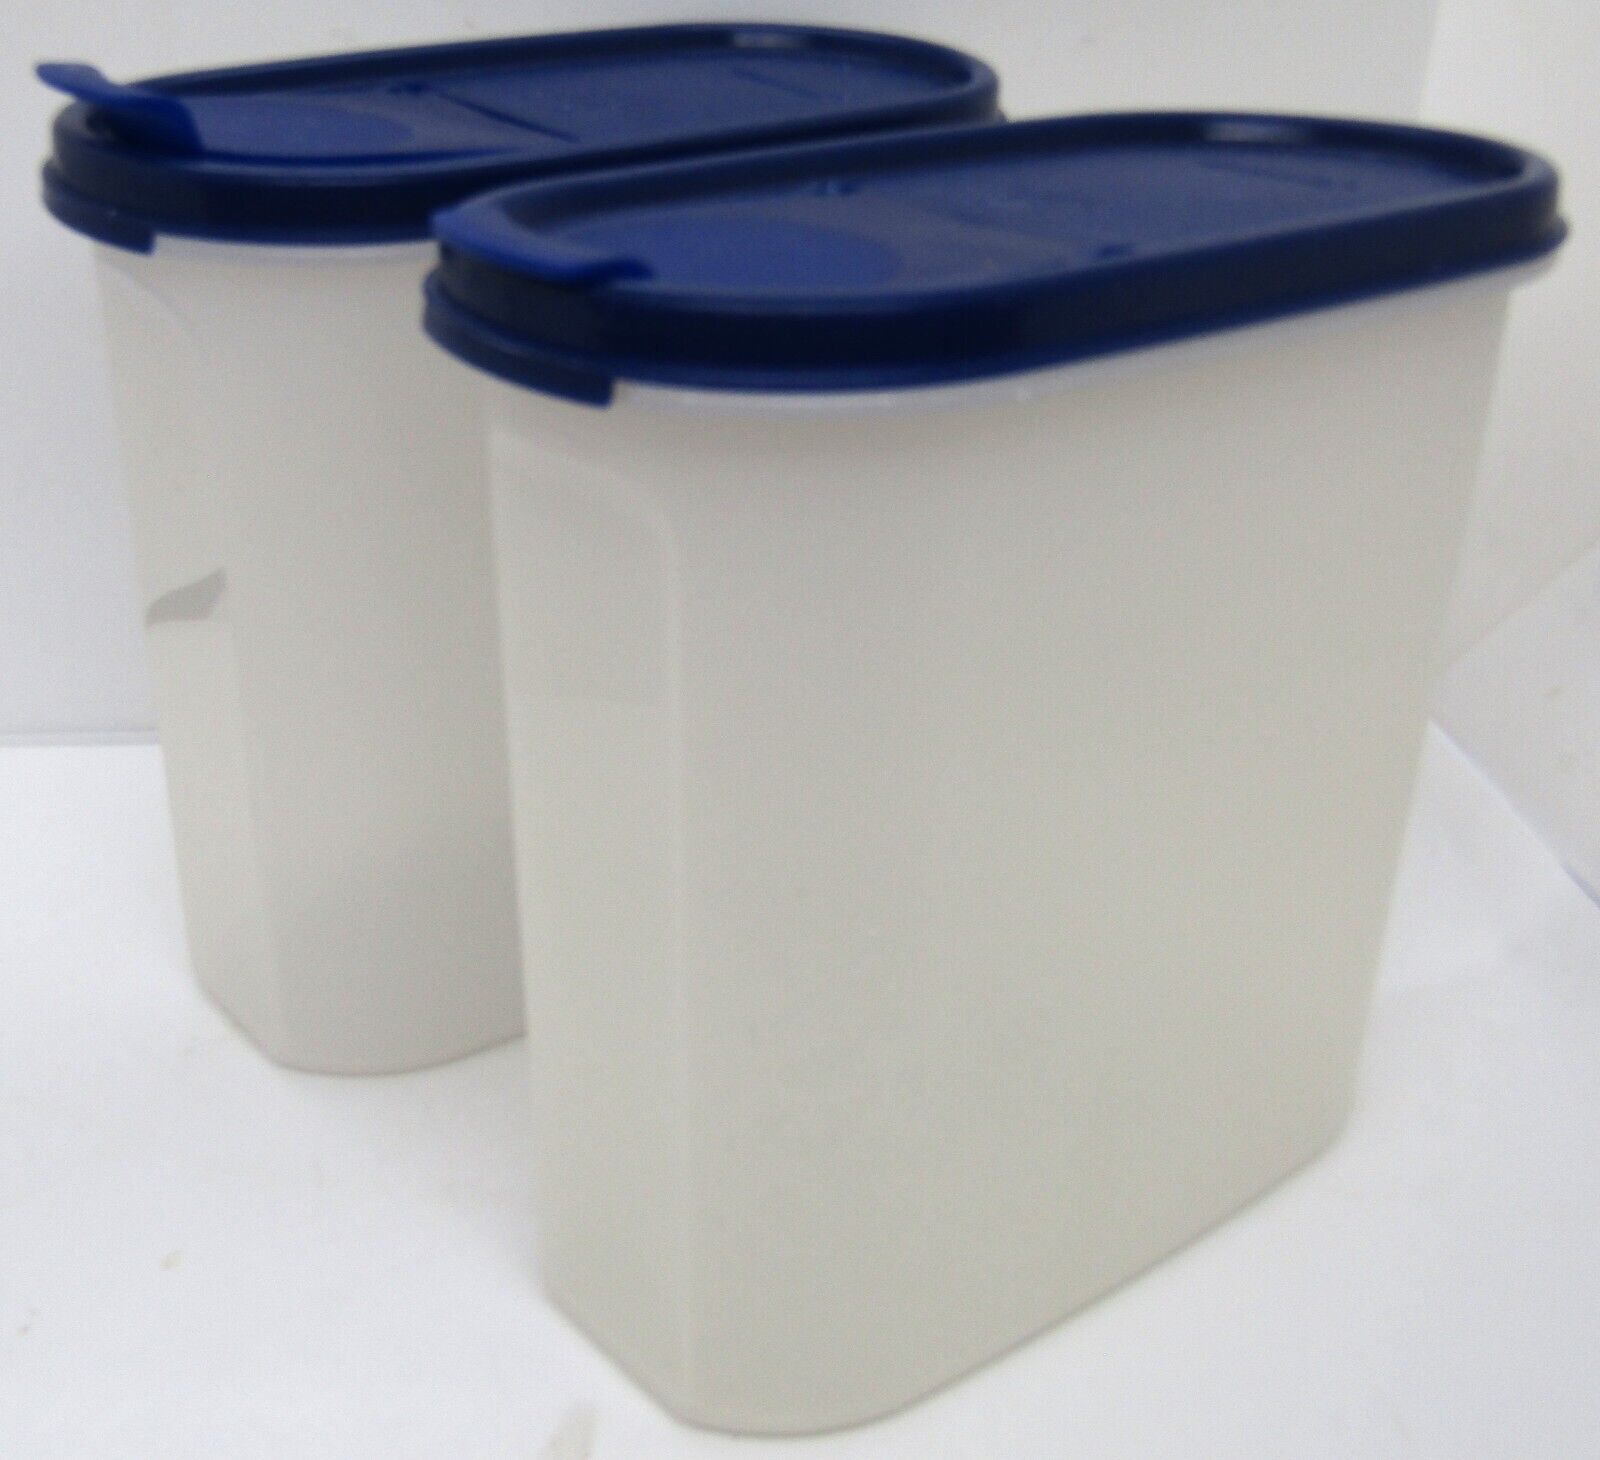 Vintage Tupperware 1613-22 Blue Lidded 7 1/2 Cup Storage Container with Spout. S